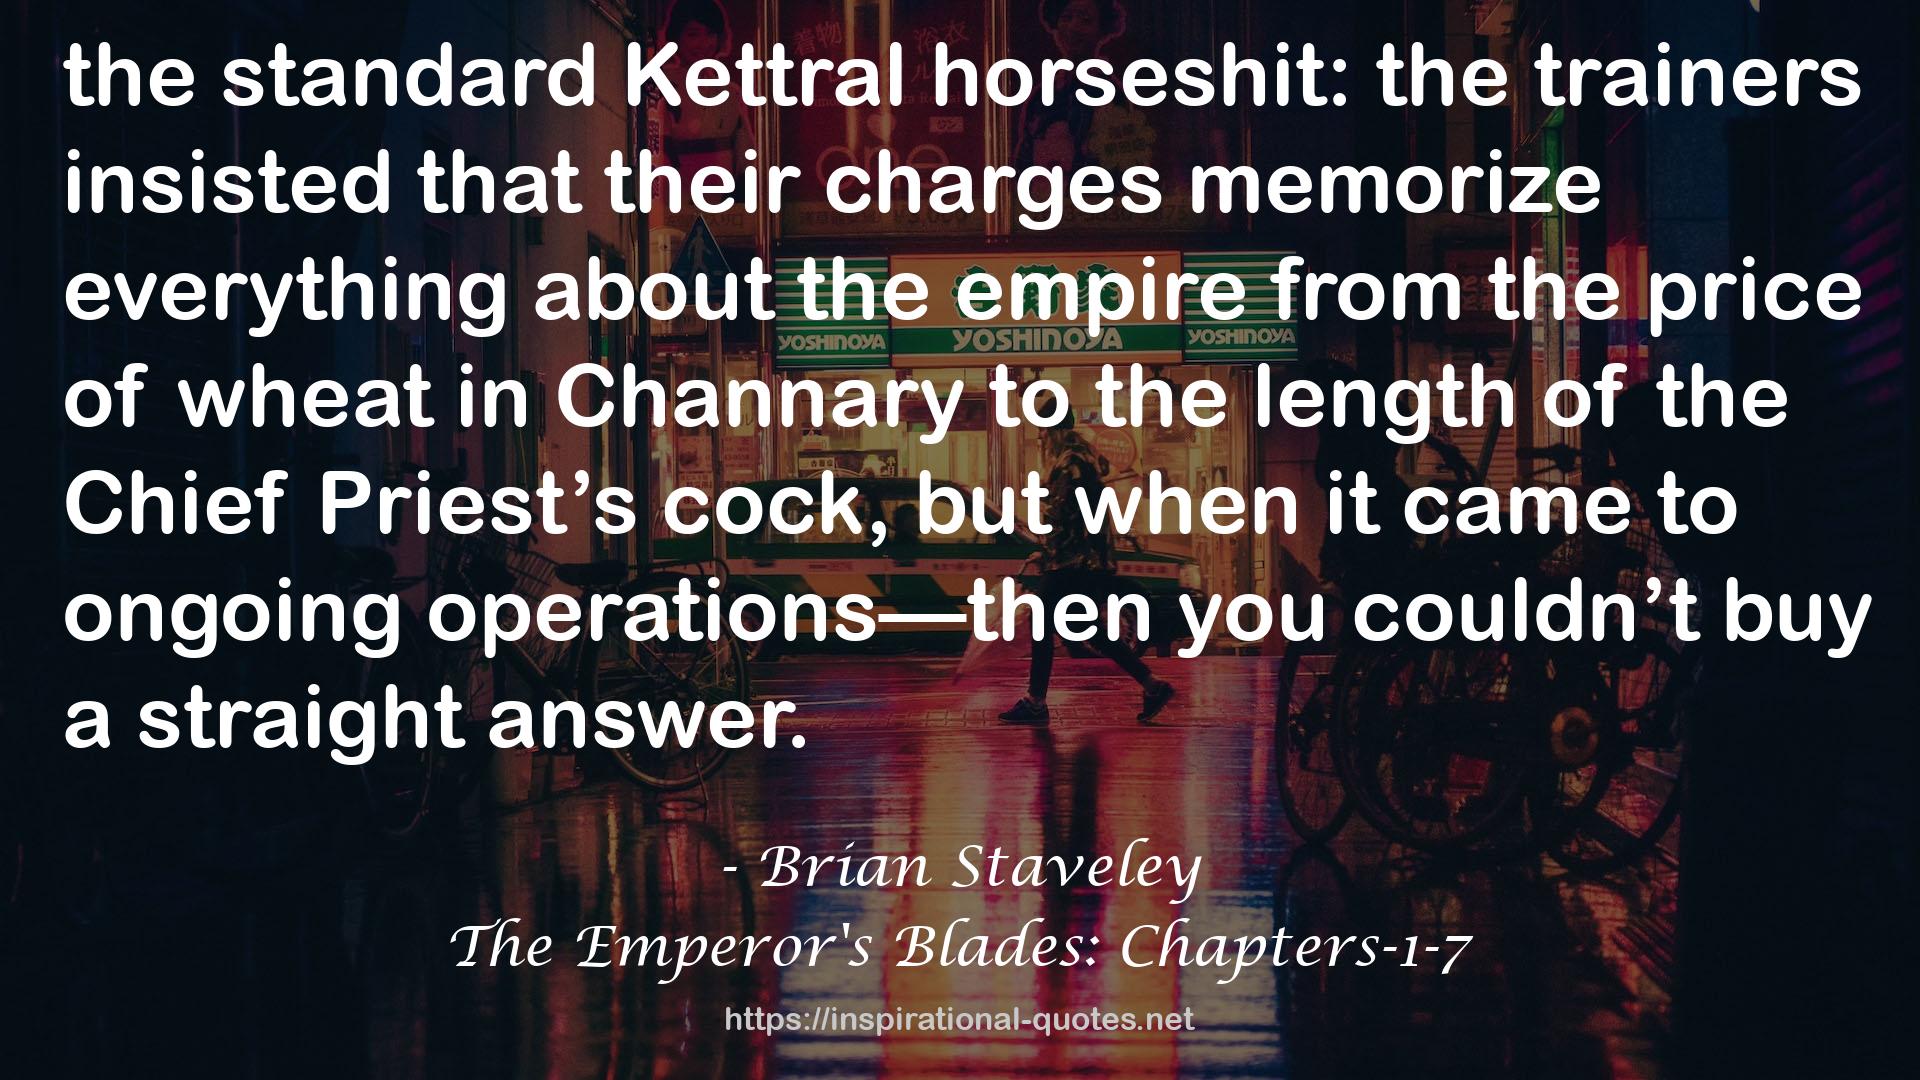 The Emperor's Blades: Chapters-1-7 QUOTES